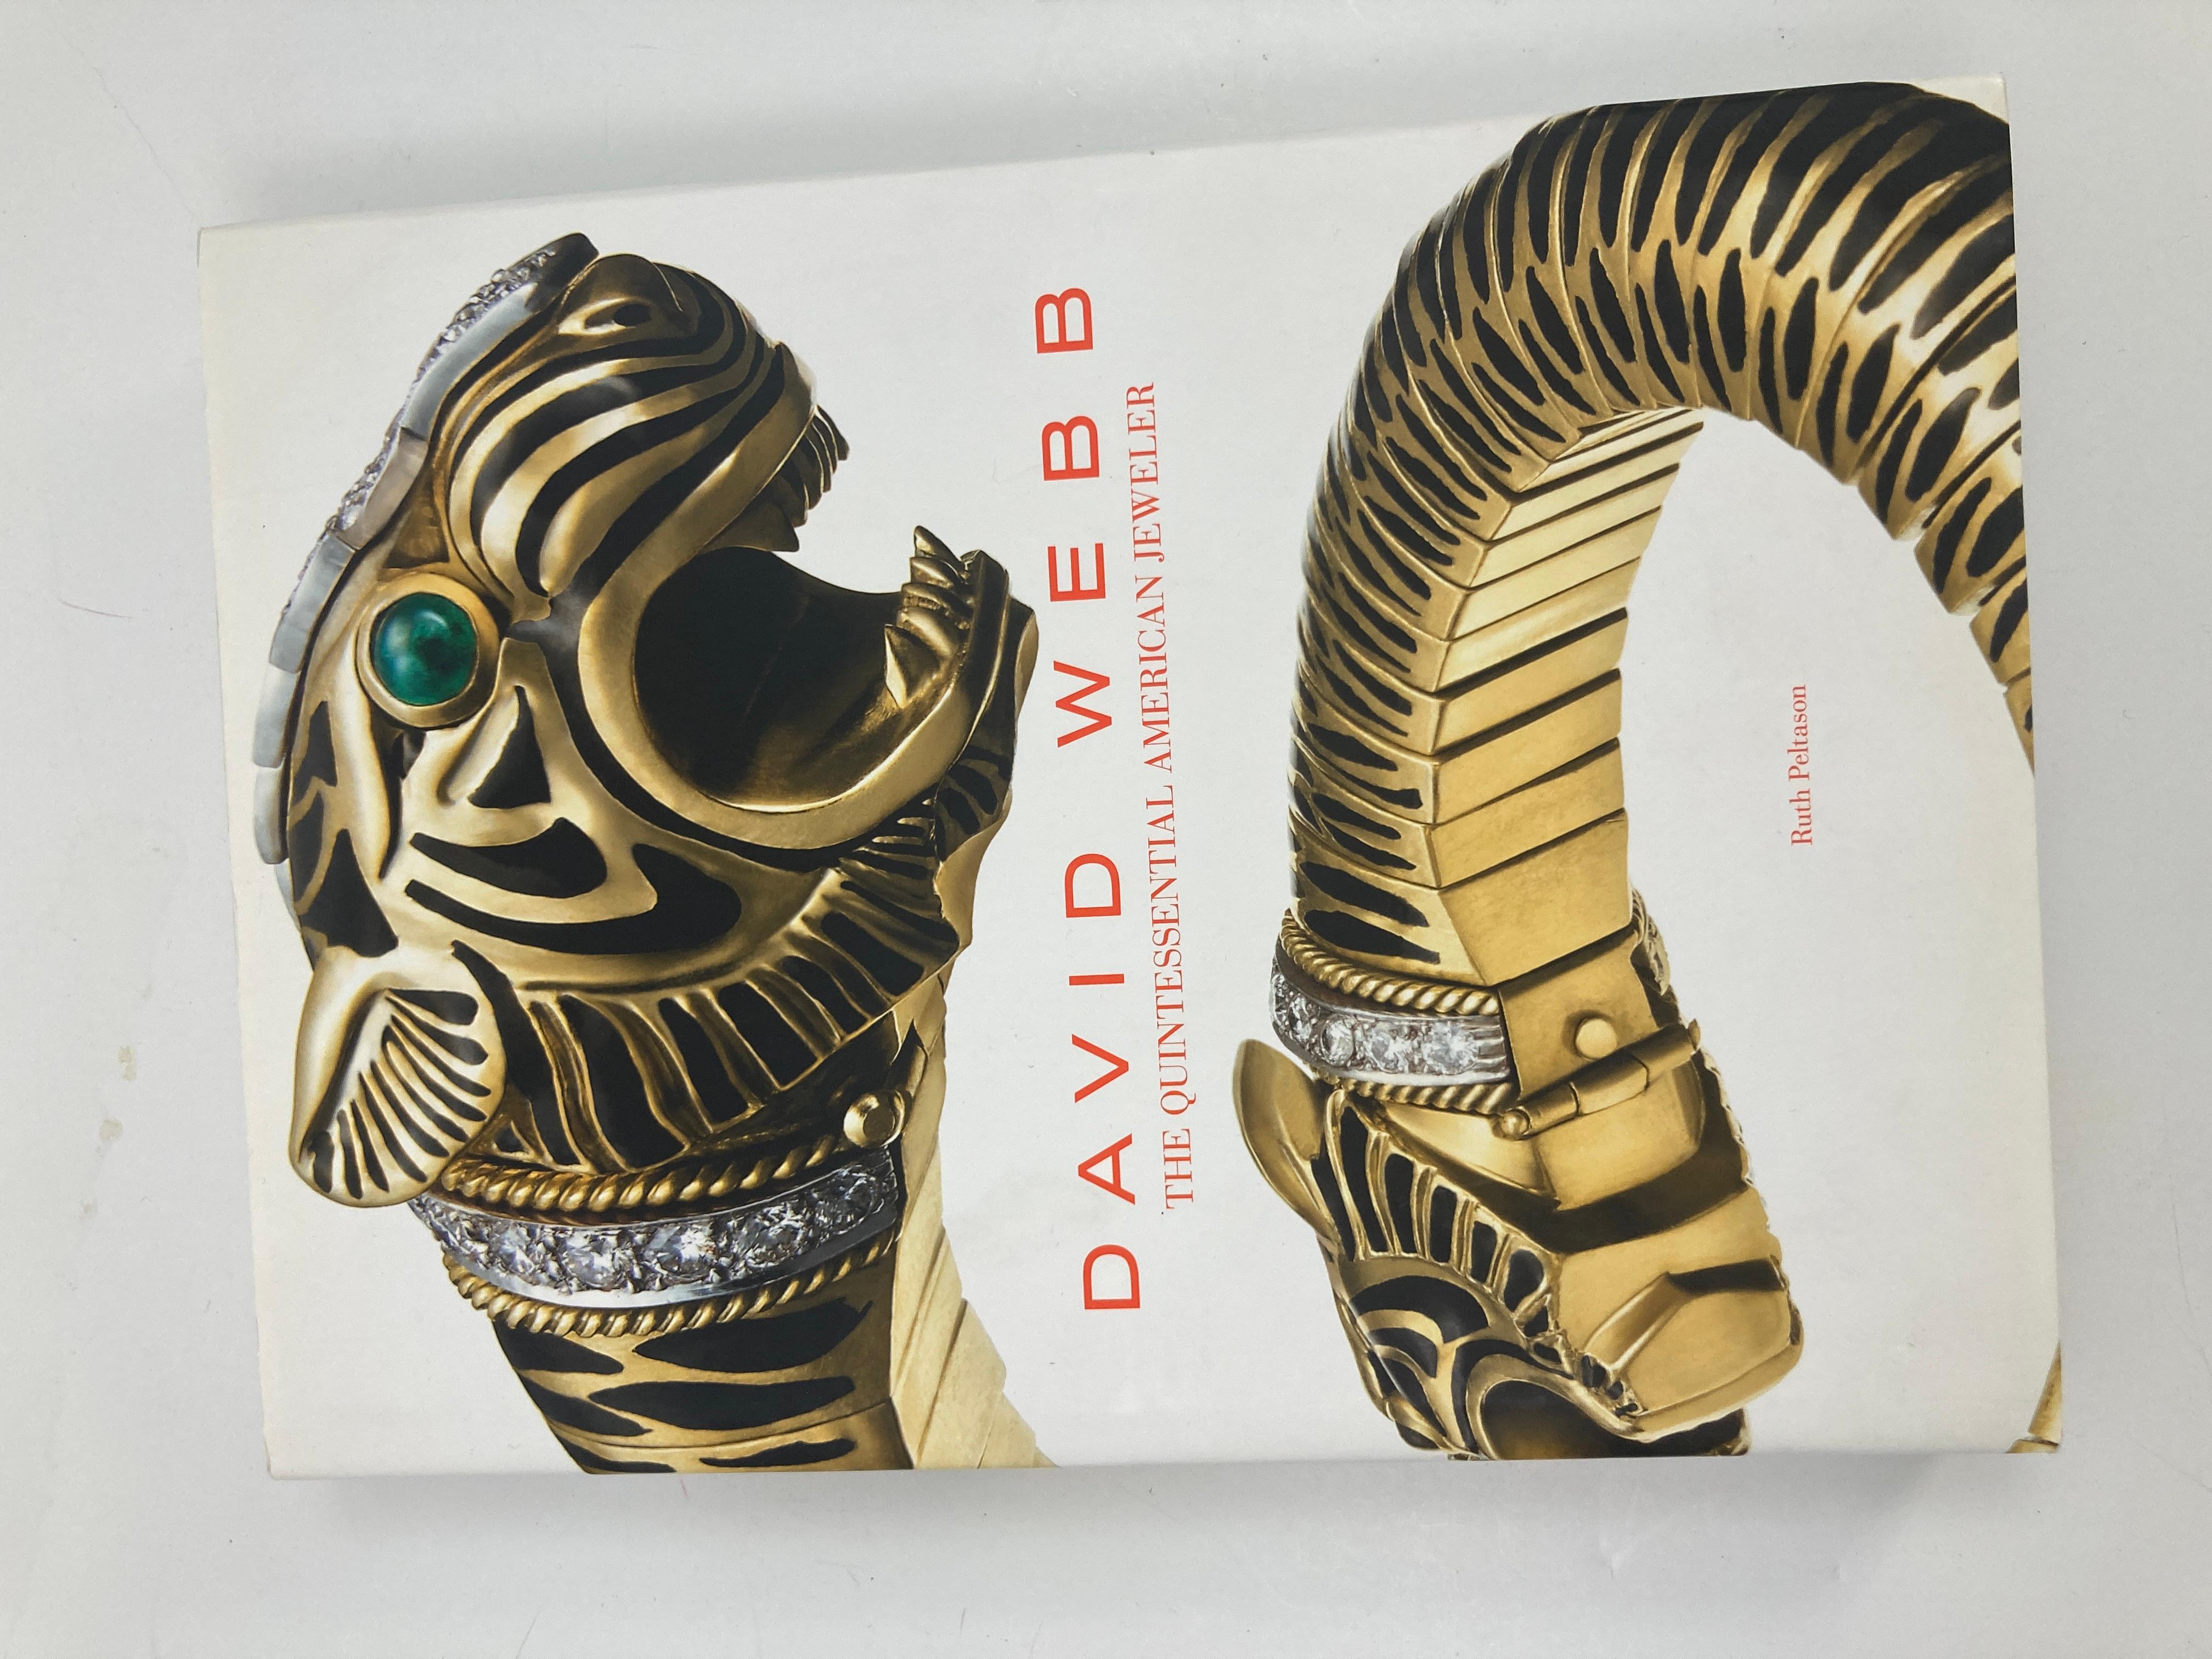 David Webb The Quintessential American Jeweler hardcover book by Ruth Peltrason c 2013.
This large heavy hardcover luxury book is an amazing archive of Webb's extraordinary 20th century jewelry designs Webb is best known for his enchanting animal